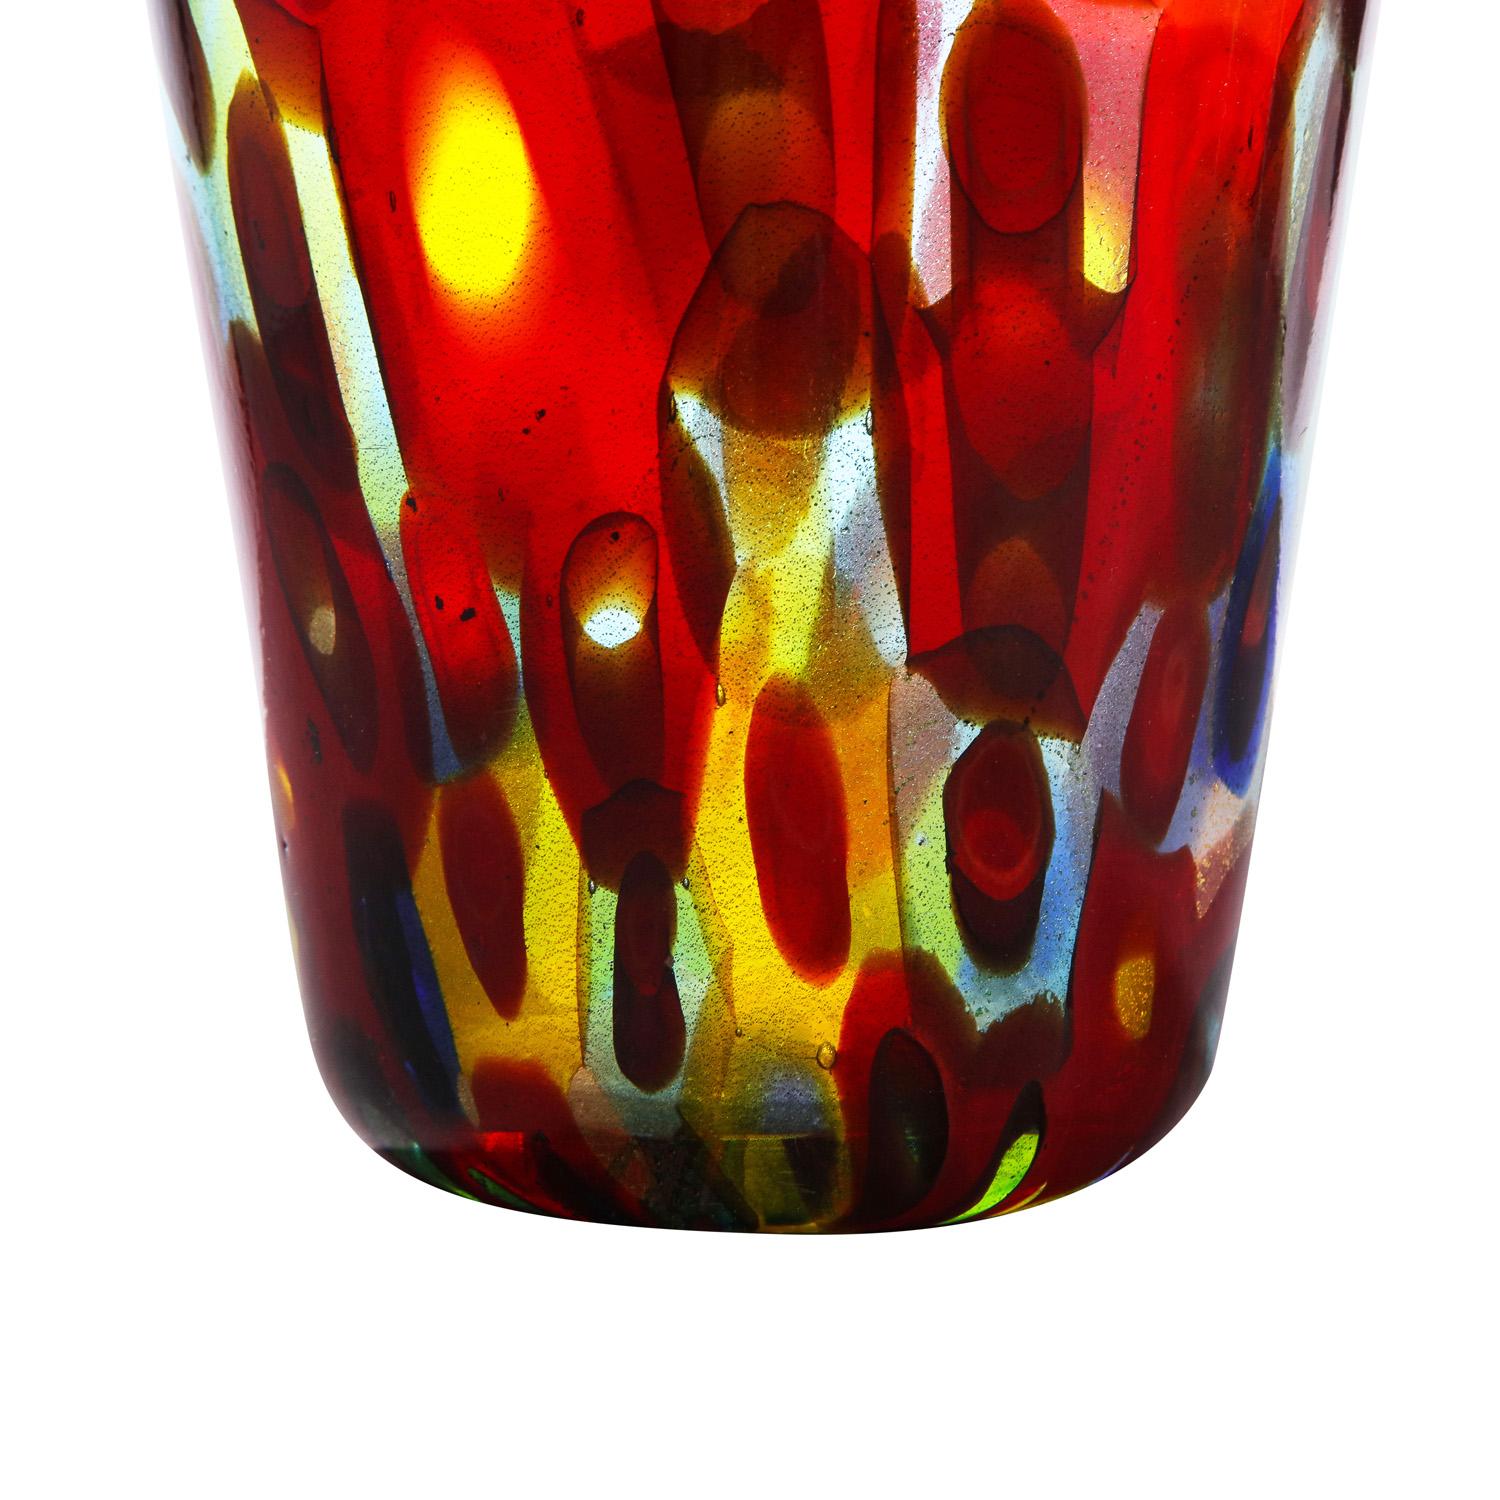 Italian Handblown Glass Vase with Large Murrhines by Anzolo Fuga for A.V.E.M, 1950s For Sale